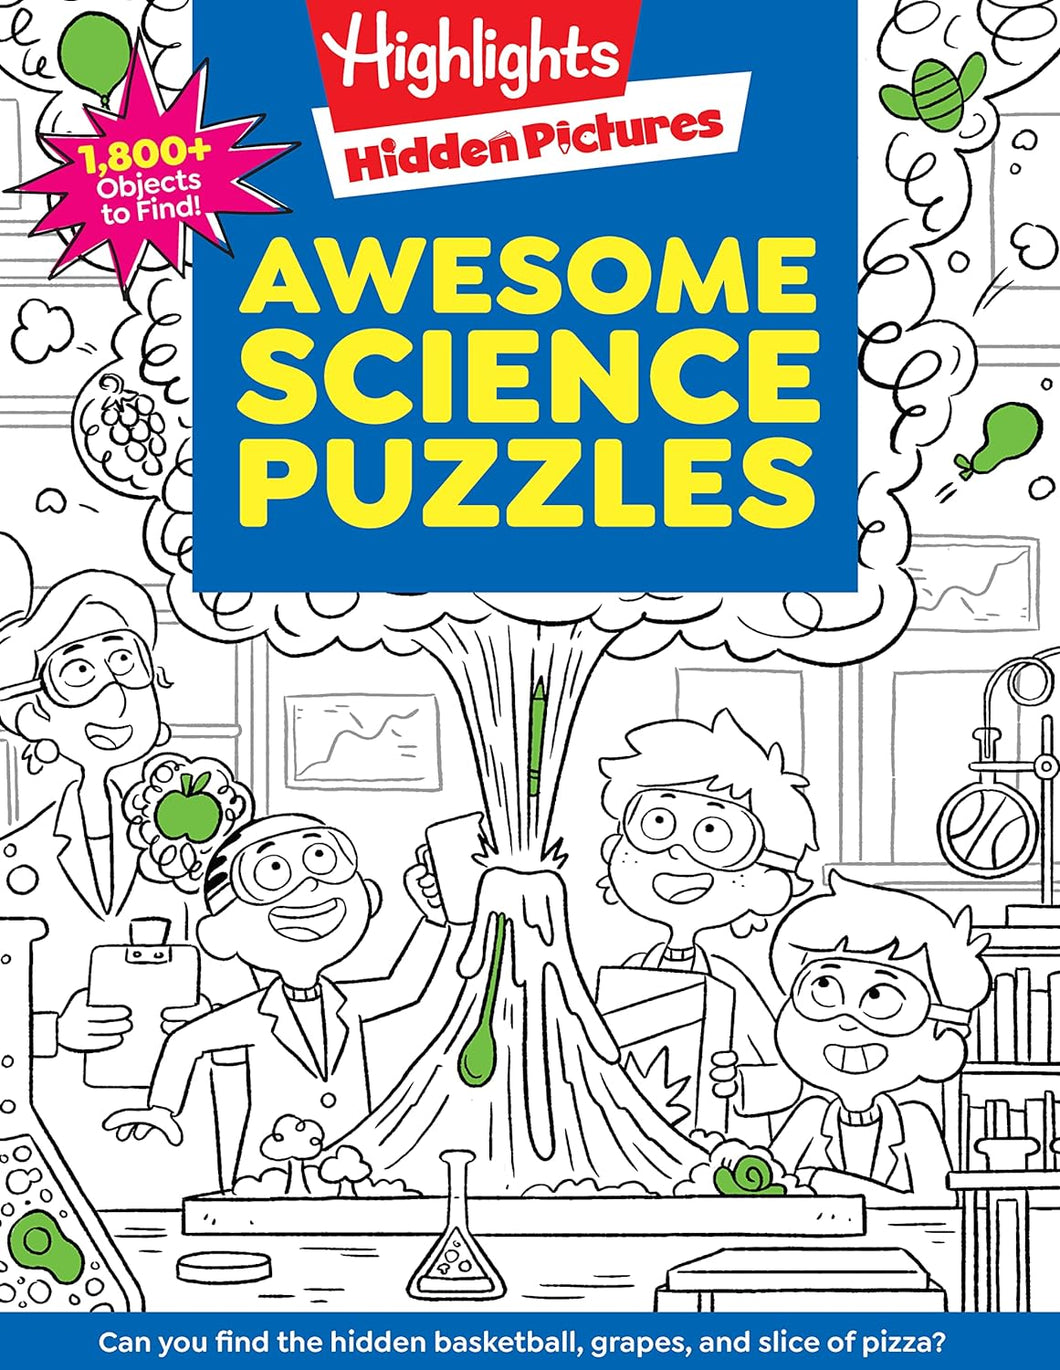 Awesome Science Puzzles Highlights